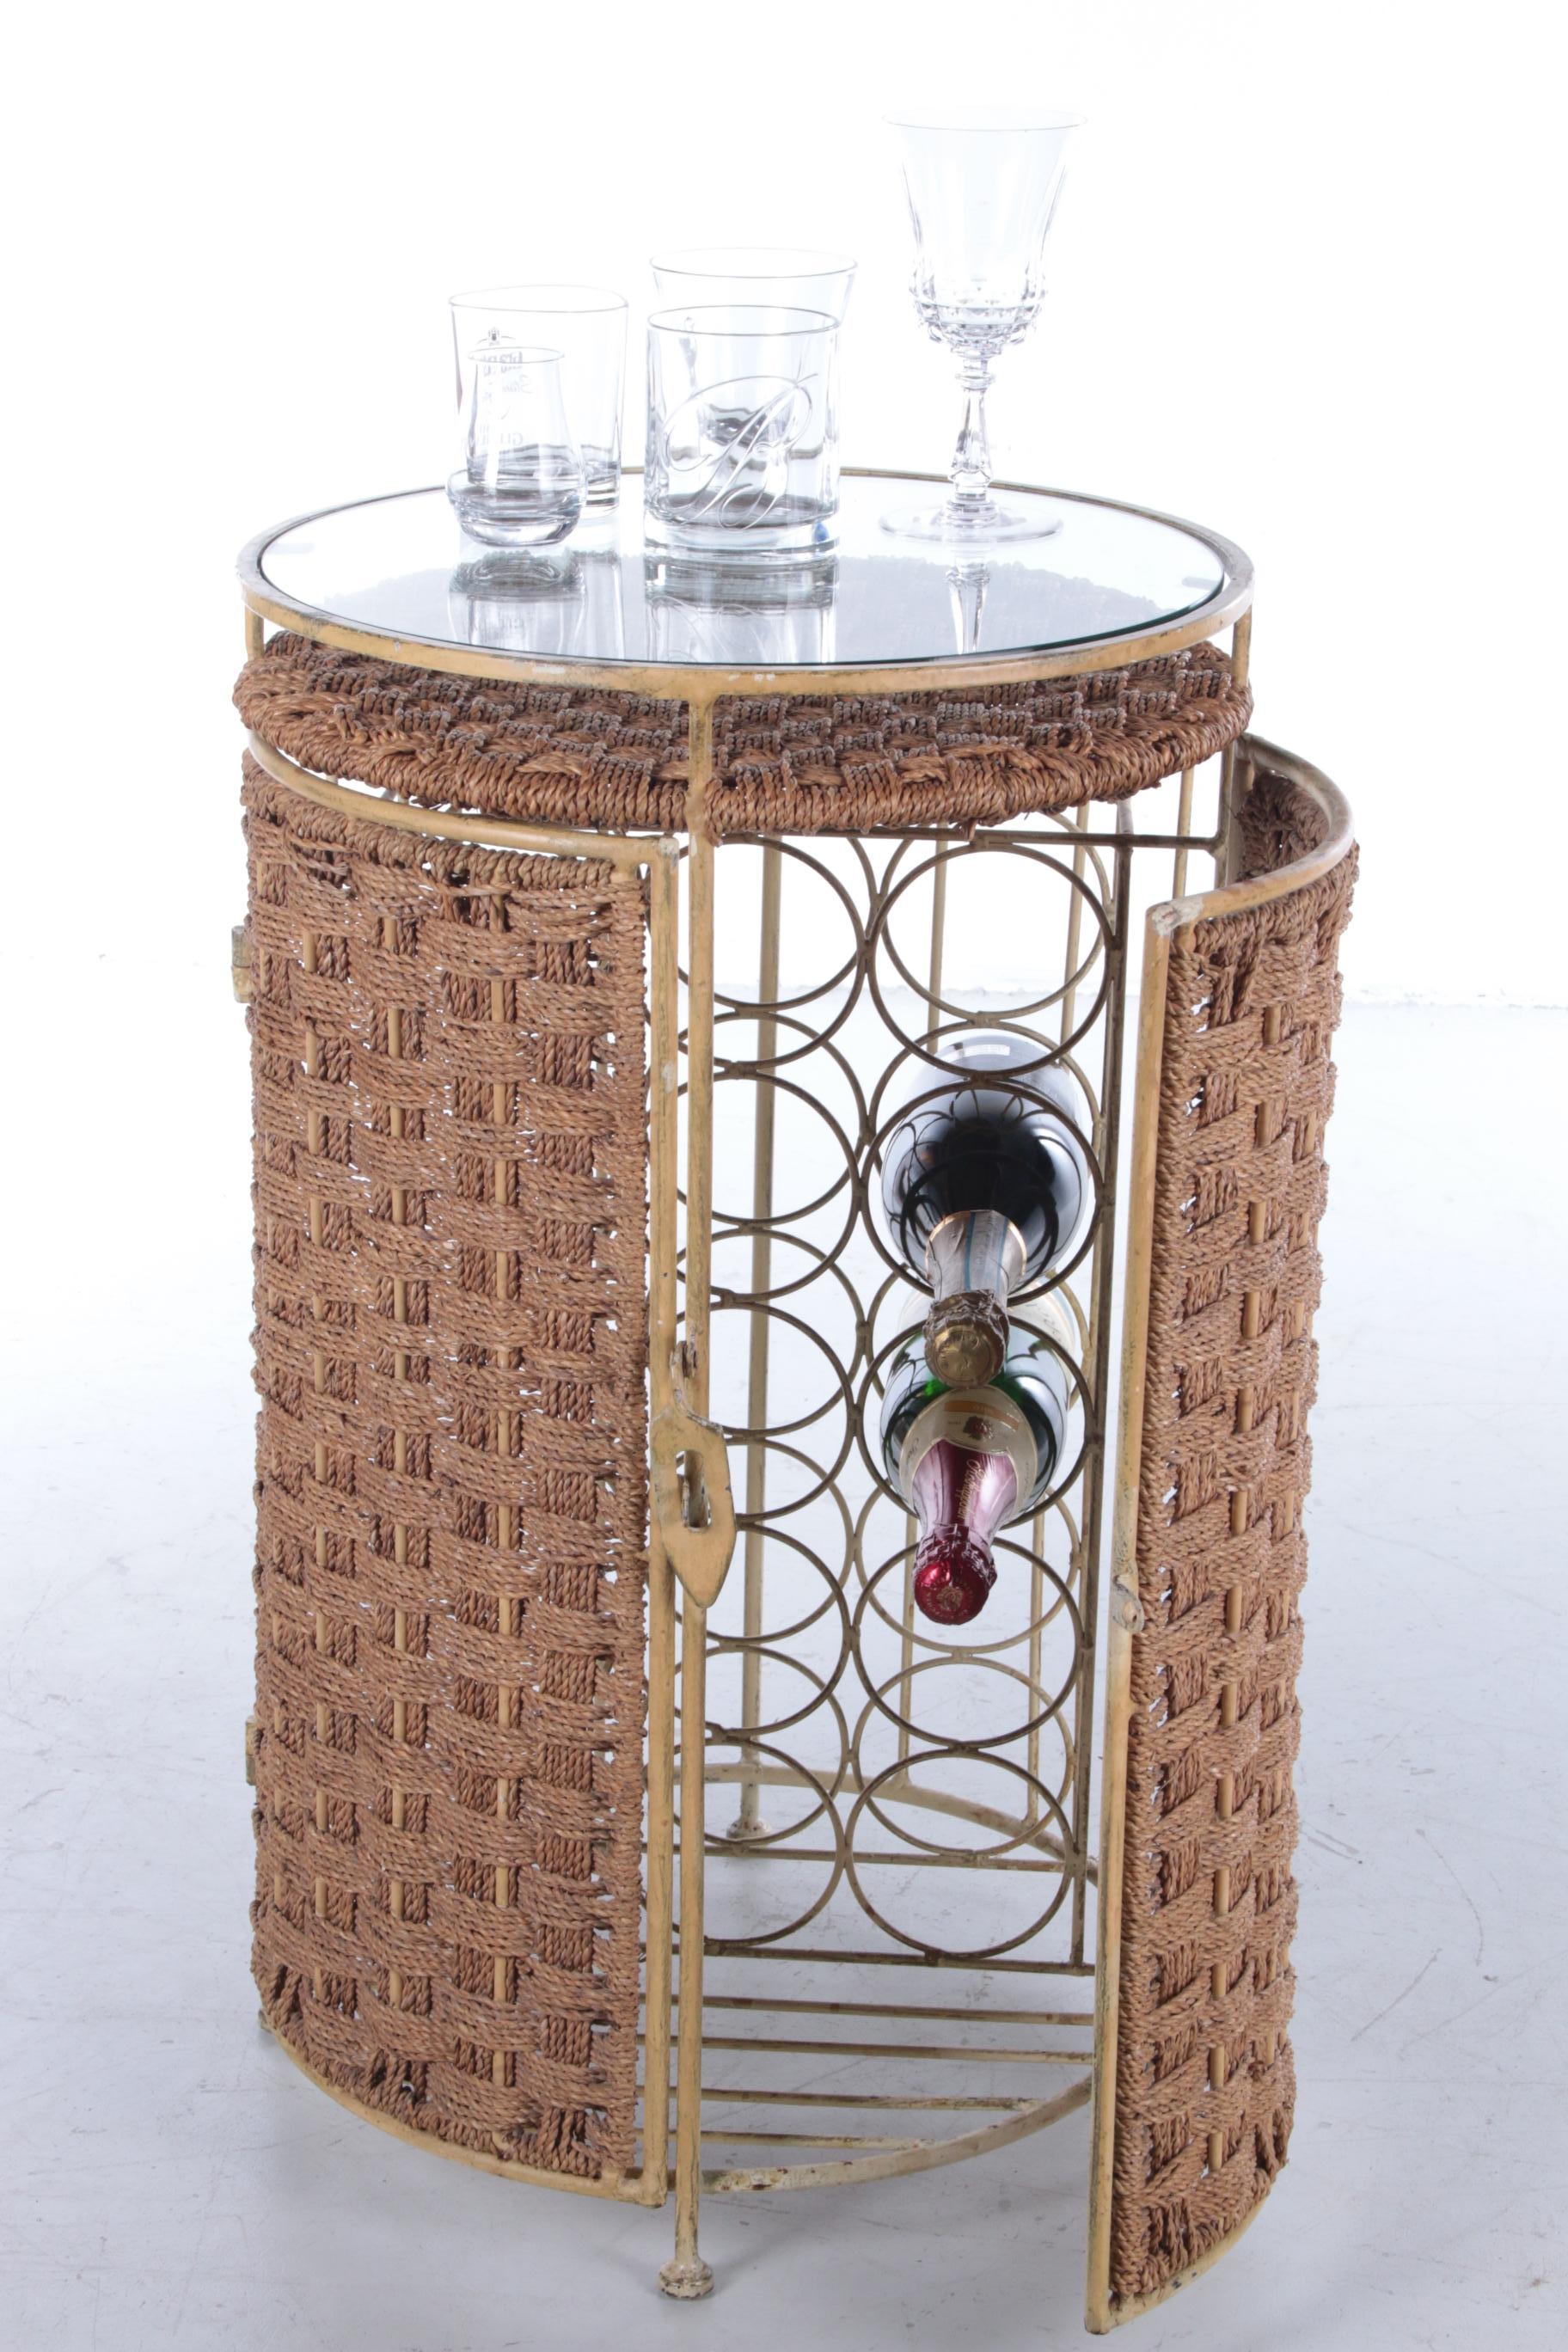 This is a very nice bottle rack from the South of France.

It is made in the 1960s from metal with sisal doors and a beautiful glass table top. This gives the bar a special and beautiful appearance whether the doors are open or closed.

The